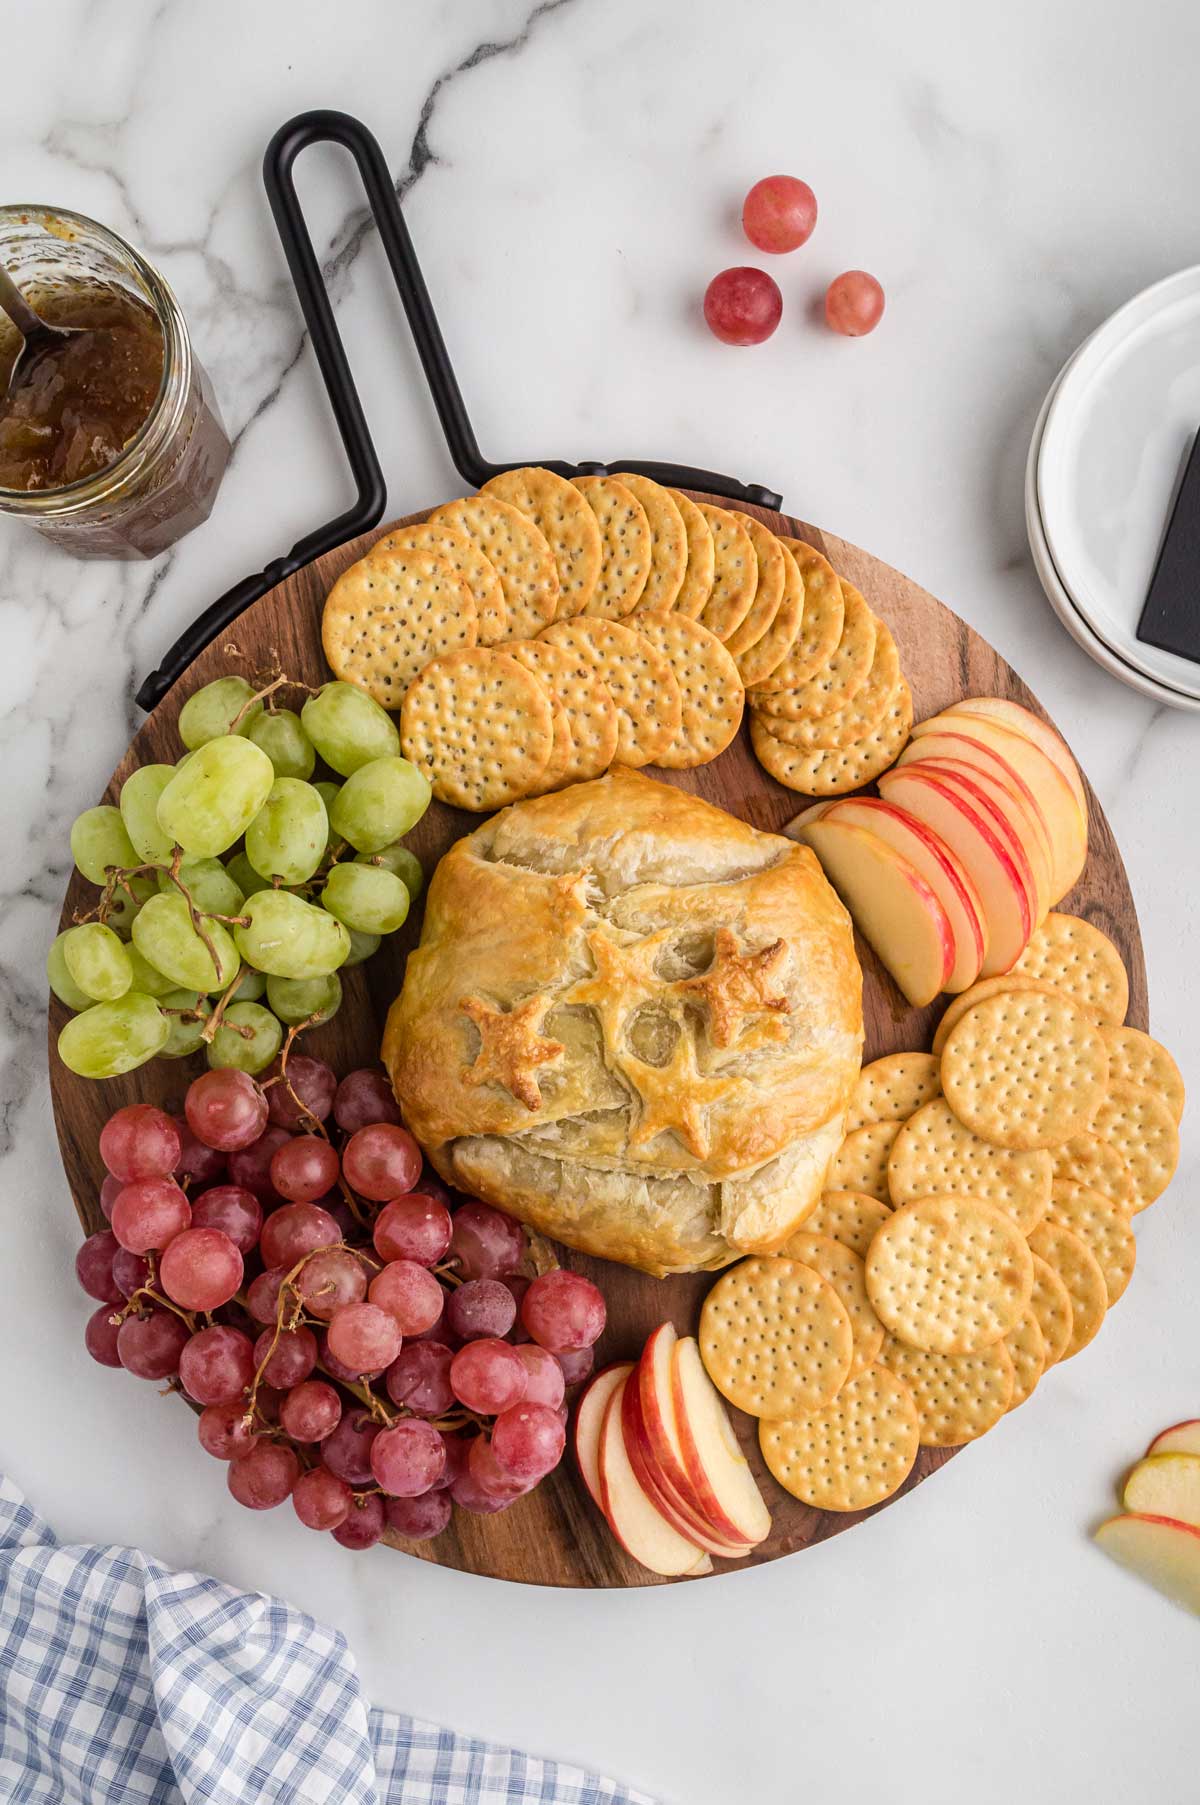 baked brie on a platter with grapes, apples, and crackers.